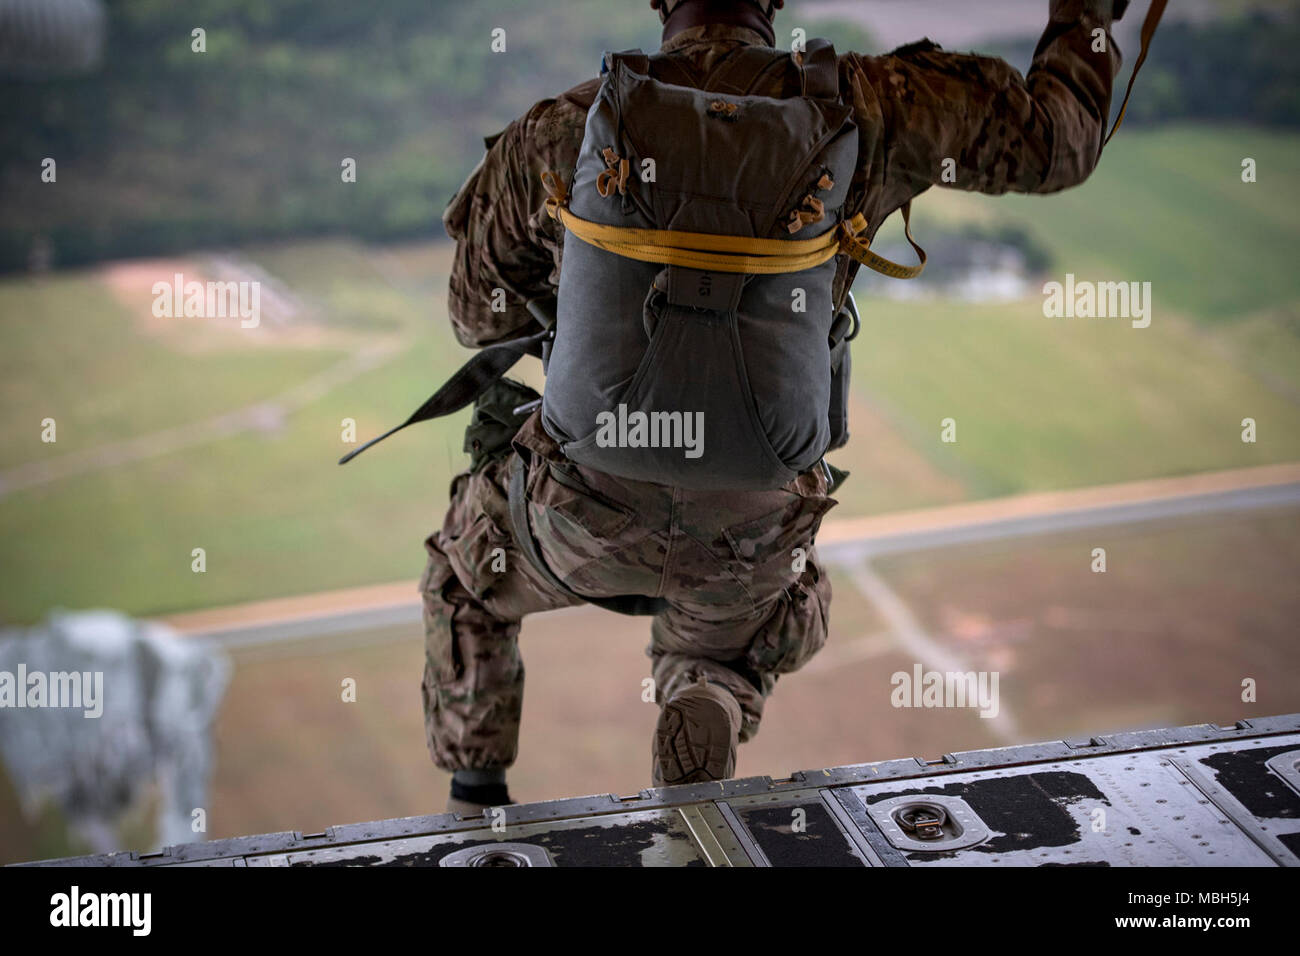 An Airman from the 820th Base Defense Group jump from an HC-130J Combat King II during static-line jump proficiency training, March 30, 2018, in the skies over Moody Air Force Base, Ga. The 820th BDG and the 71st RQS work together frequently so the defenders and the aircrew can maintain their qualifications. Stock Photo